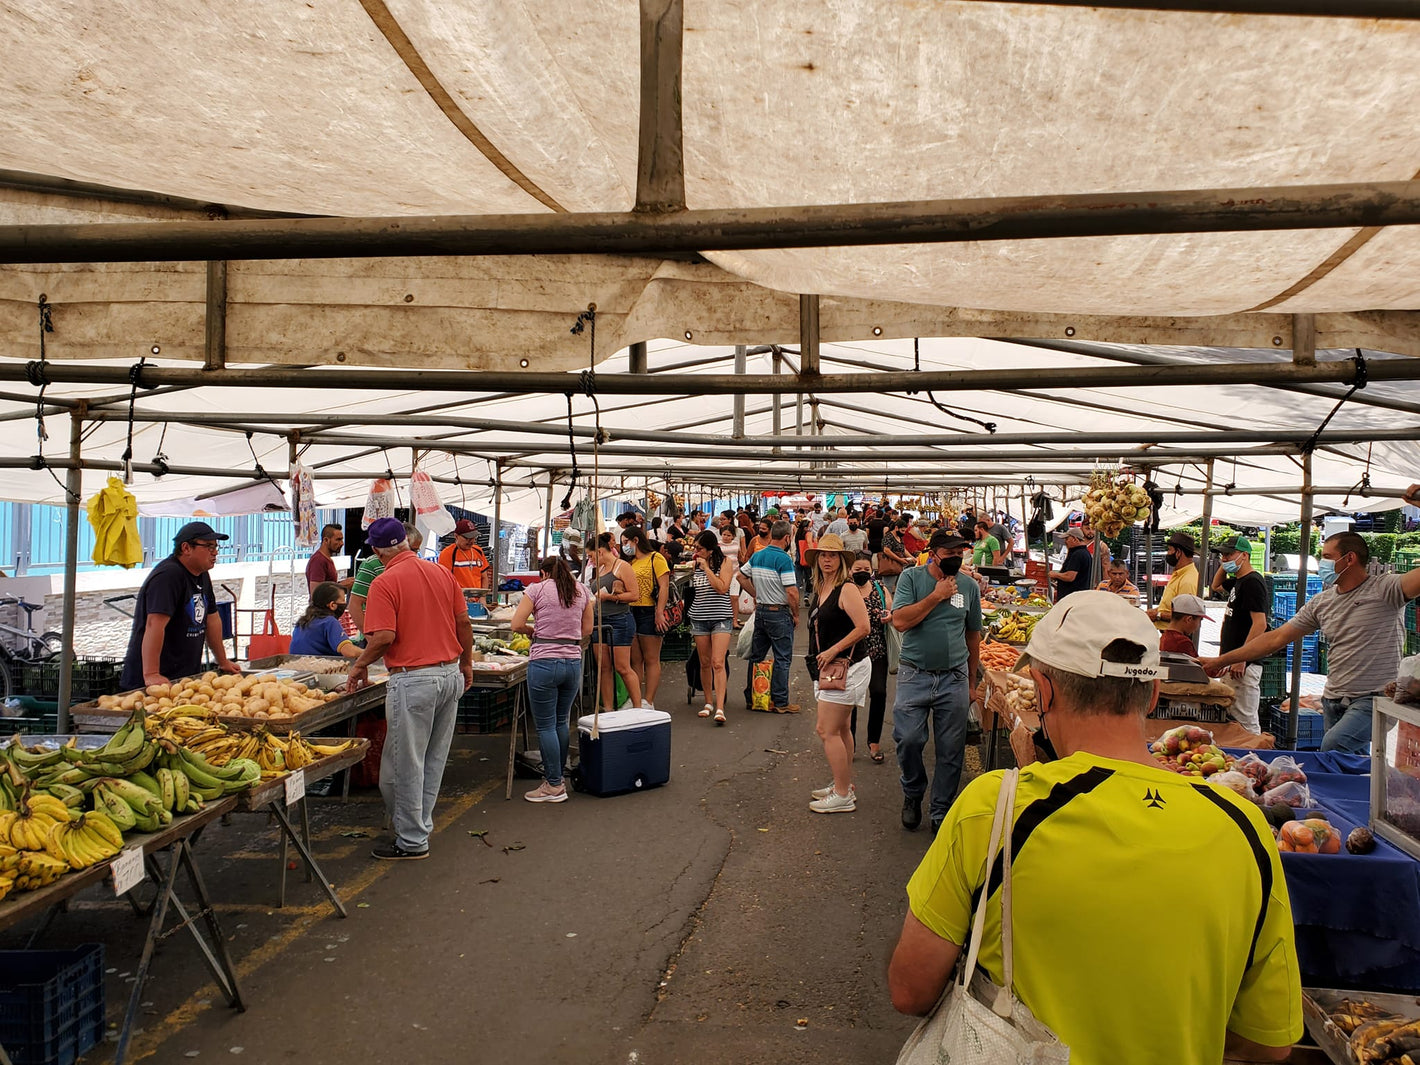 Crowds of people shopping at the Cooperstown Farmers Market